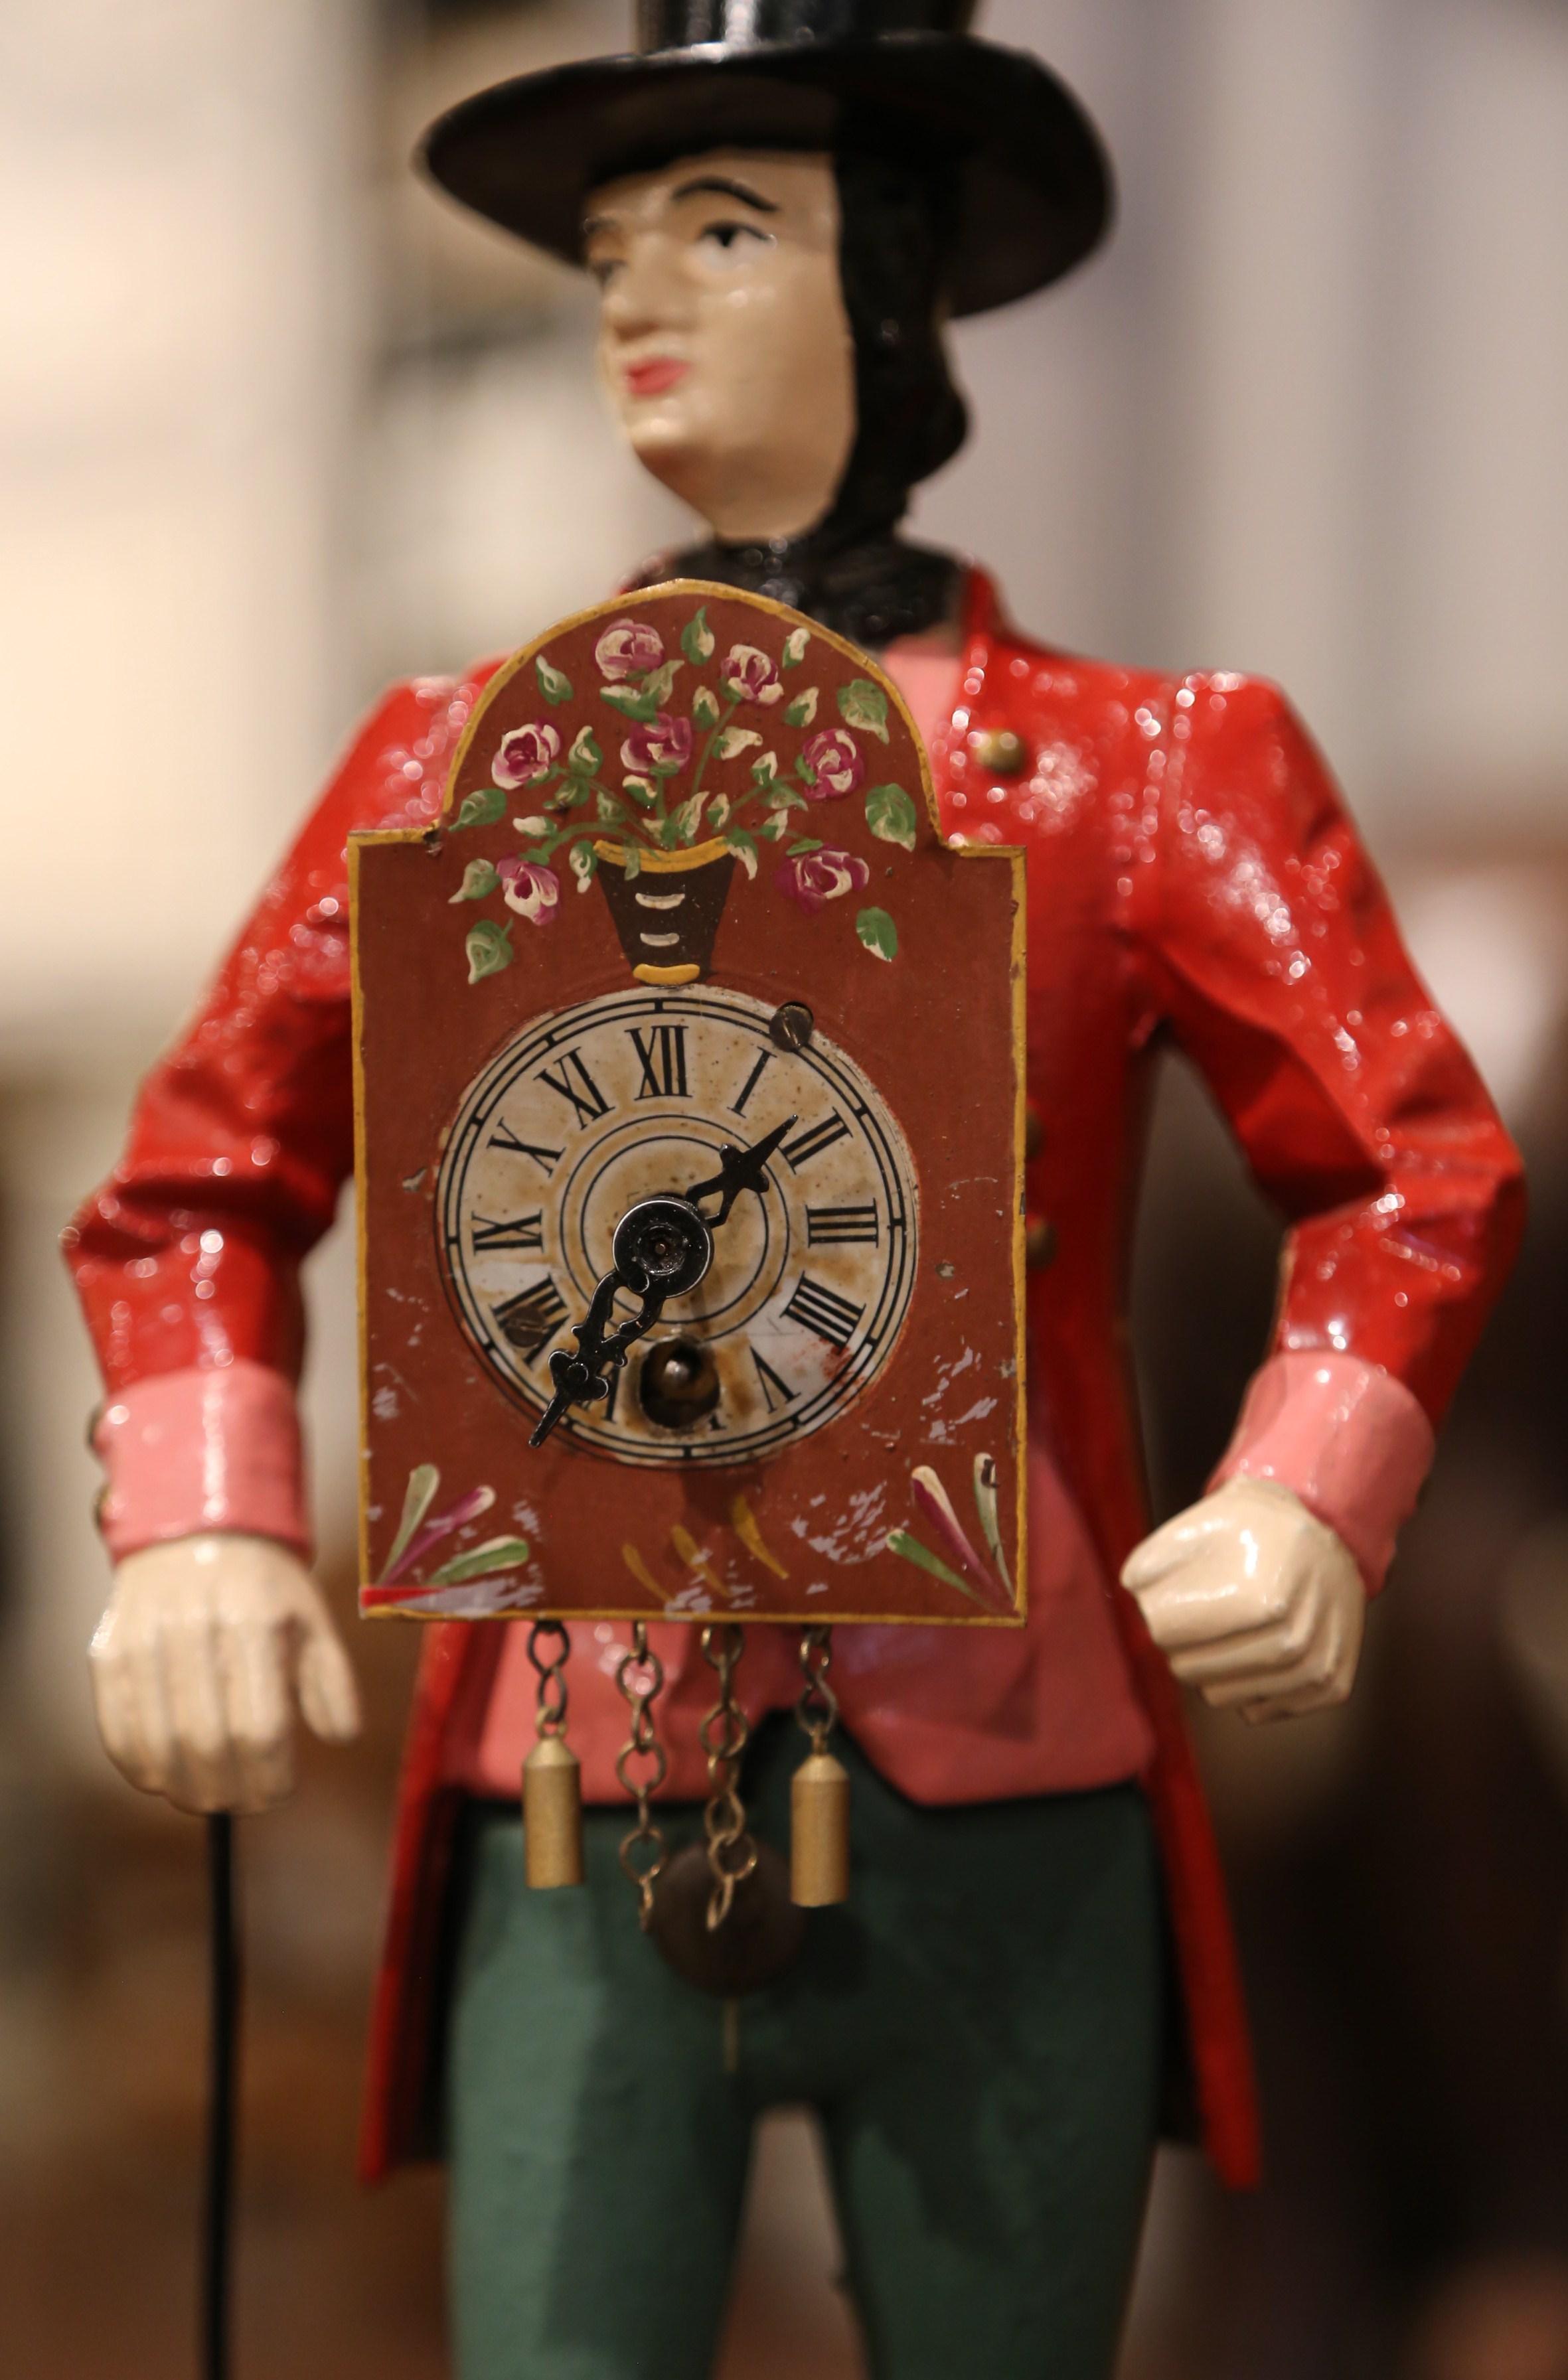 Place this colorful clock on a kitchen counter or a mantel. Crafted in France, circa 1880, the piece stands on a black metal base and depicts a clock salesman in formal clothing carrying a clock on his belly. The original clock mechanism has been